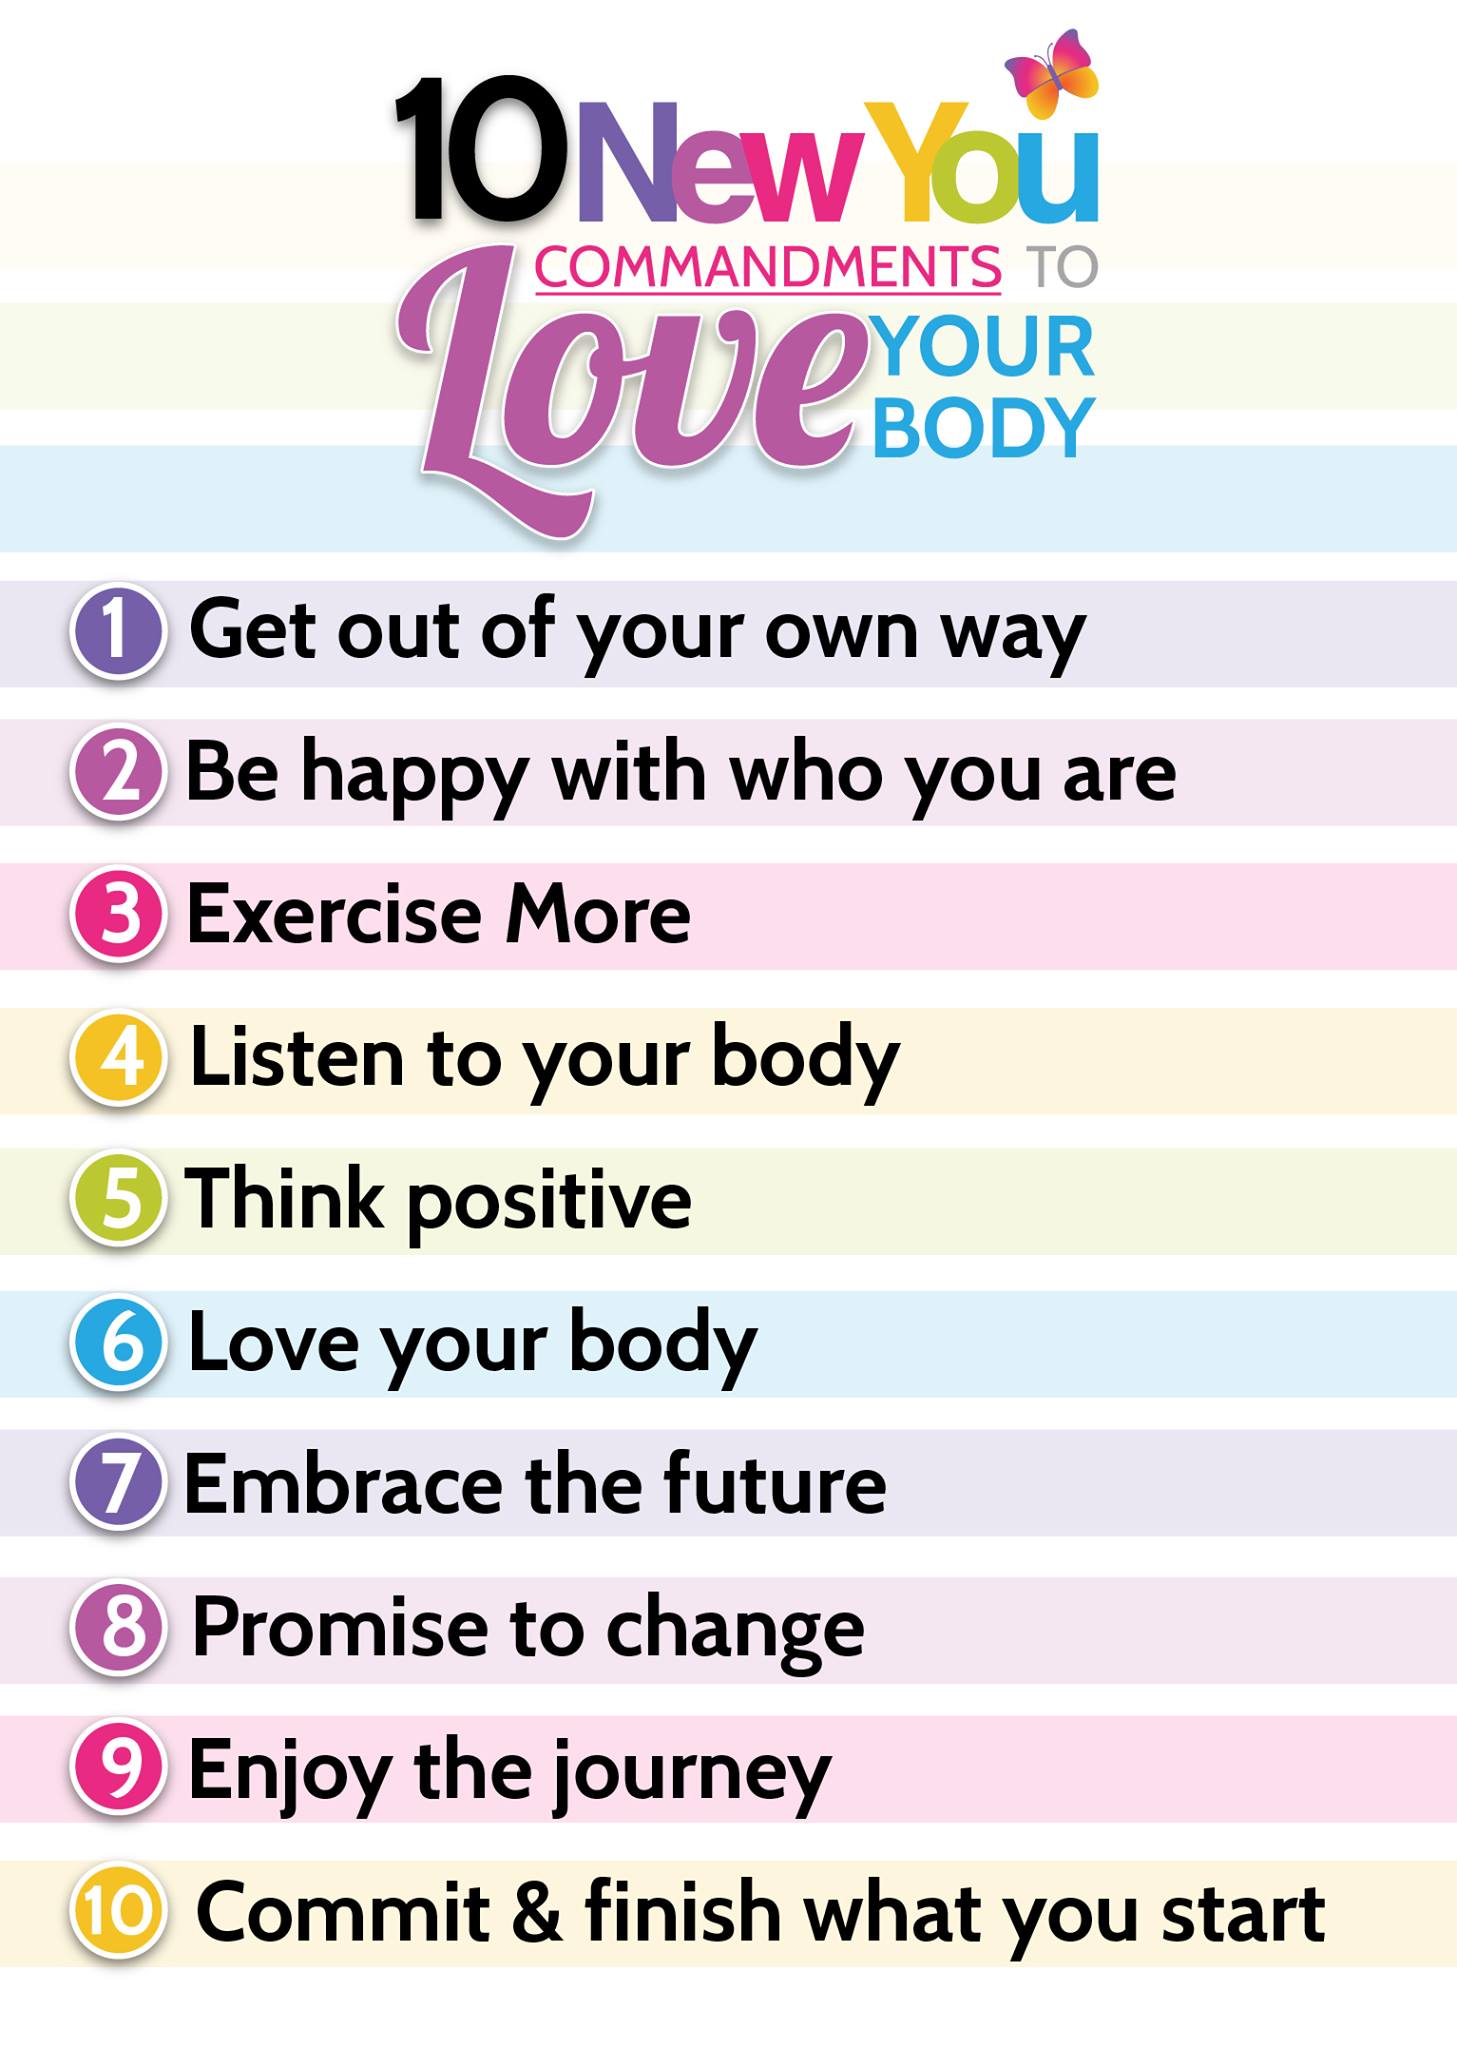 10 Commandments to LOVE YOUR BODY